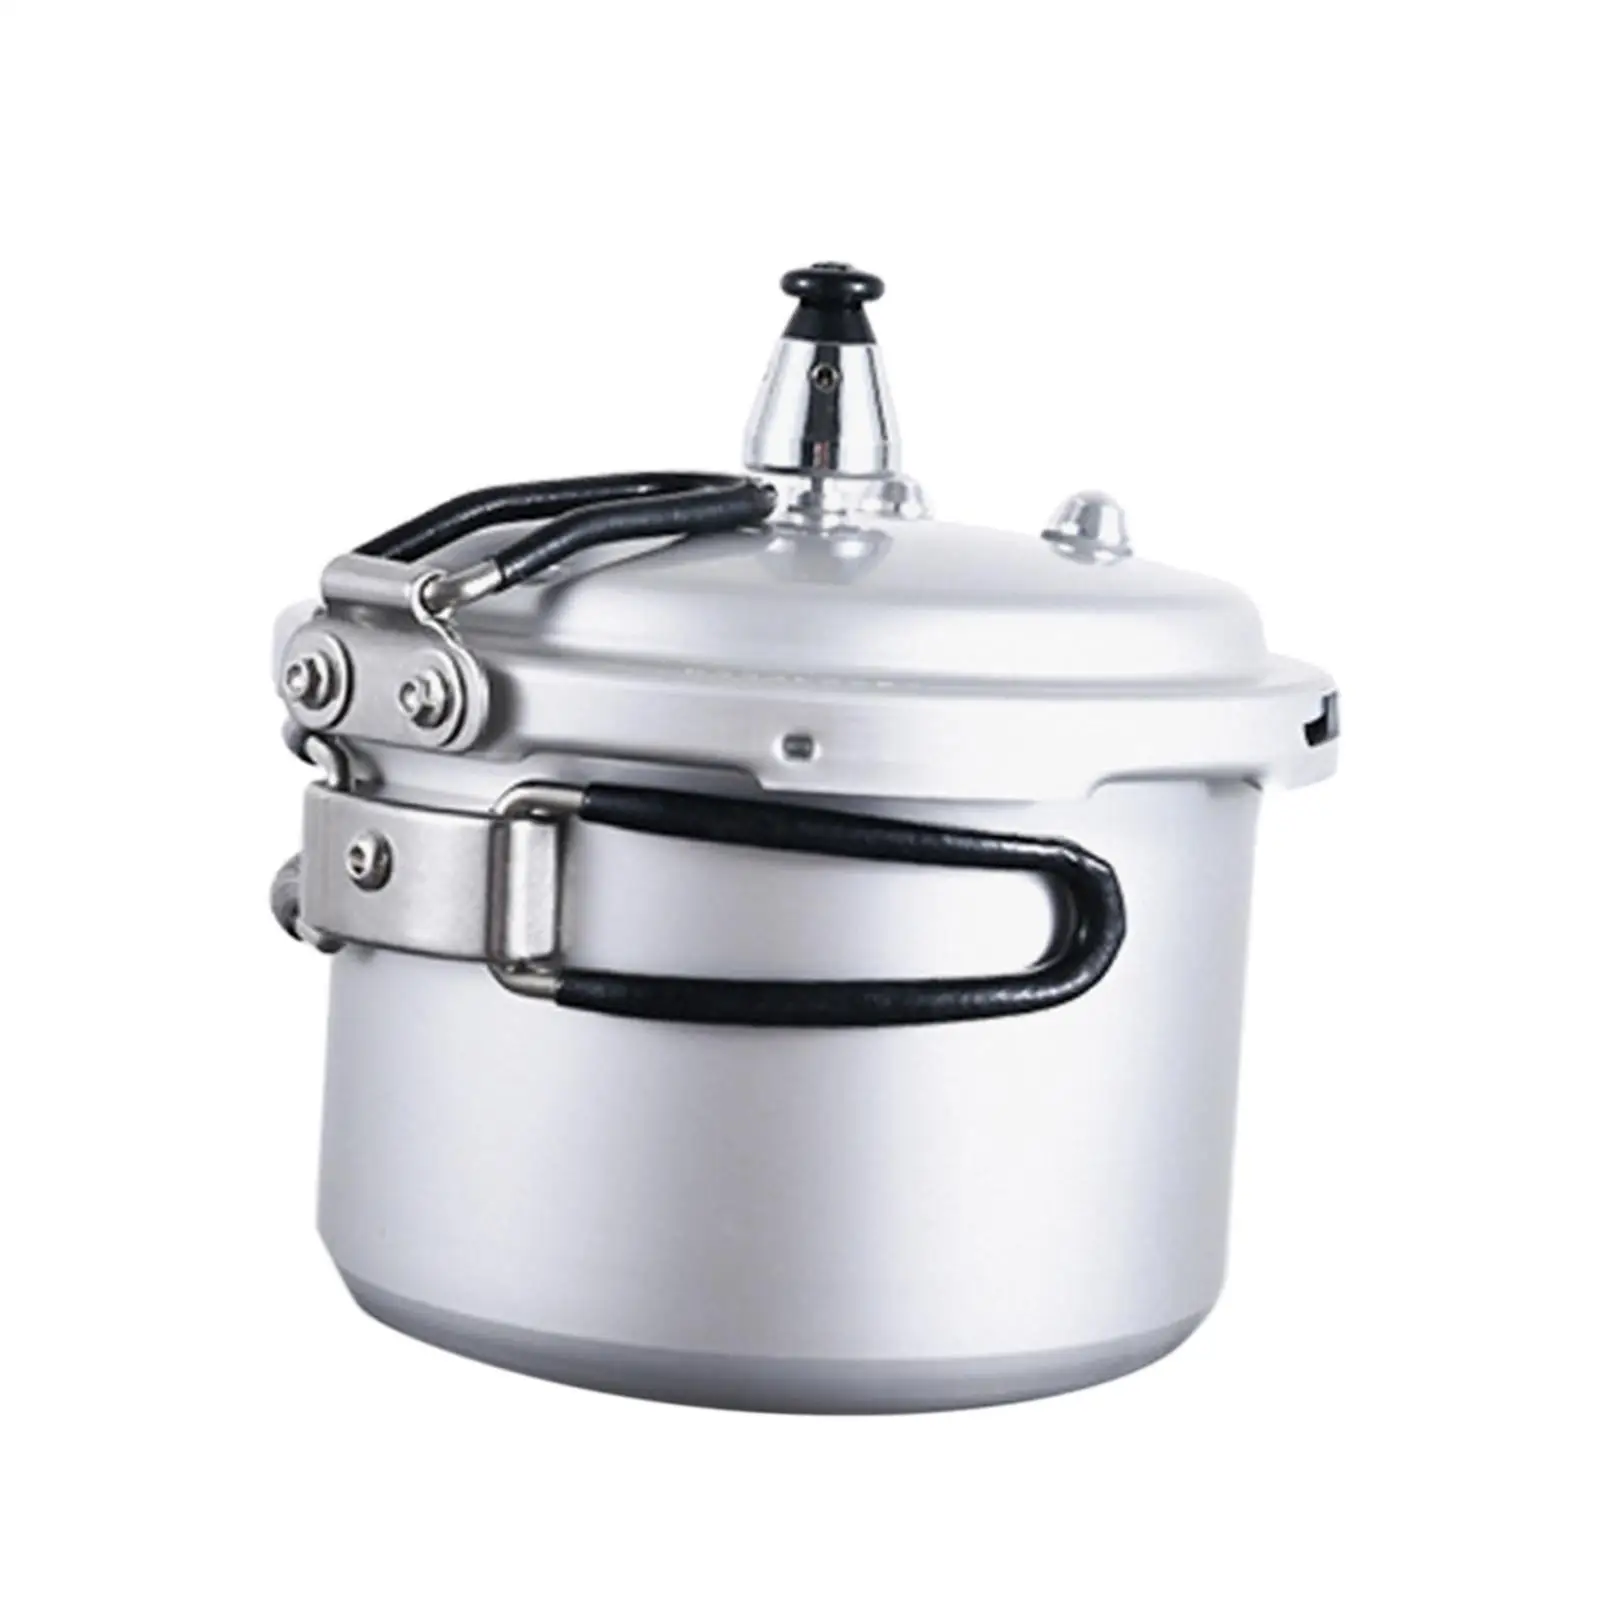 Small Pressure Cooker, Pressure Canner, Portable Gas Induction Cooker for Camping Outdoor